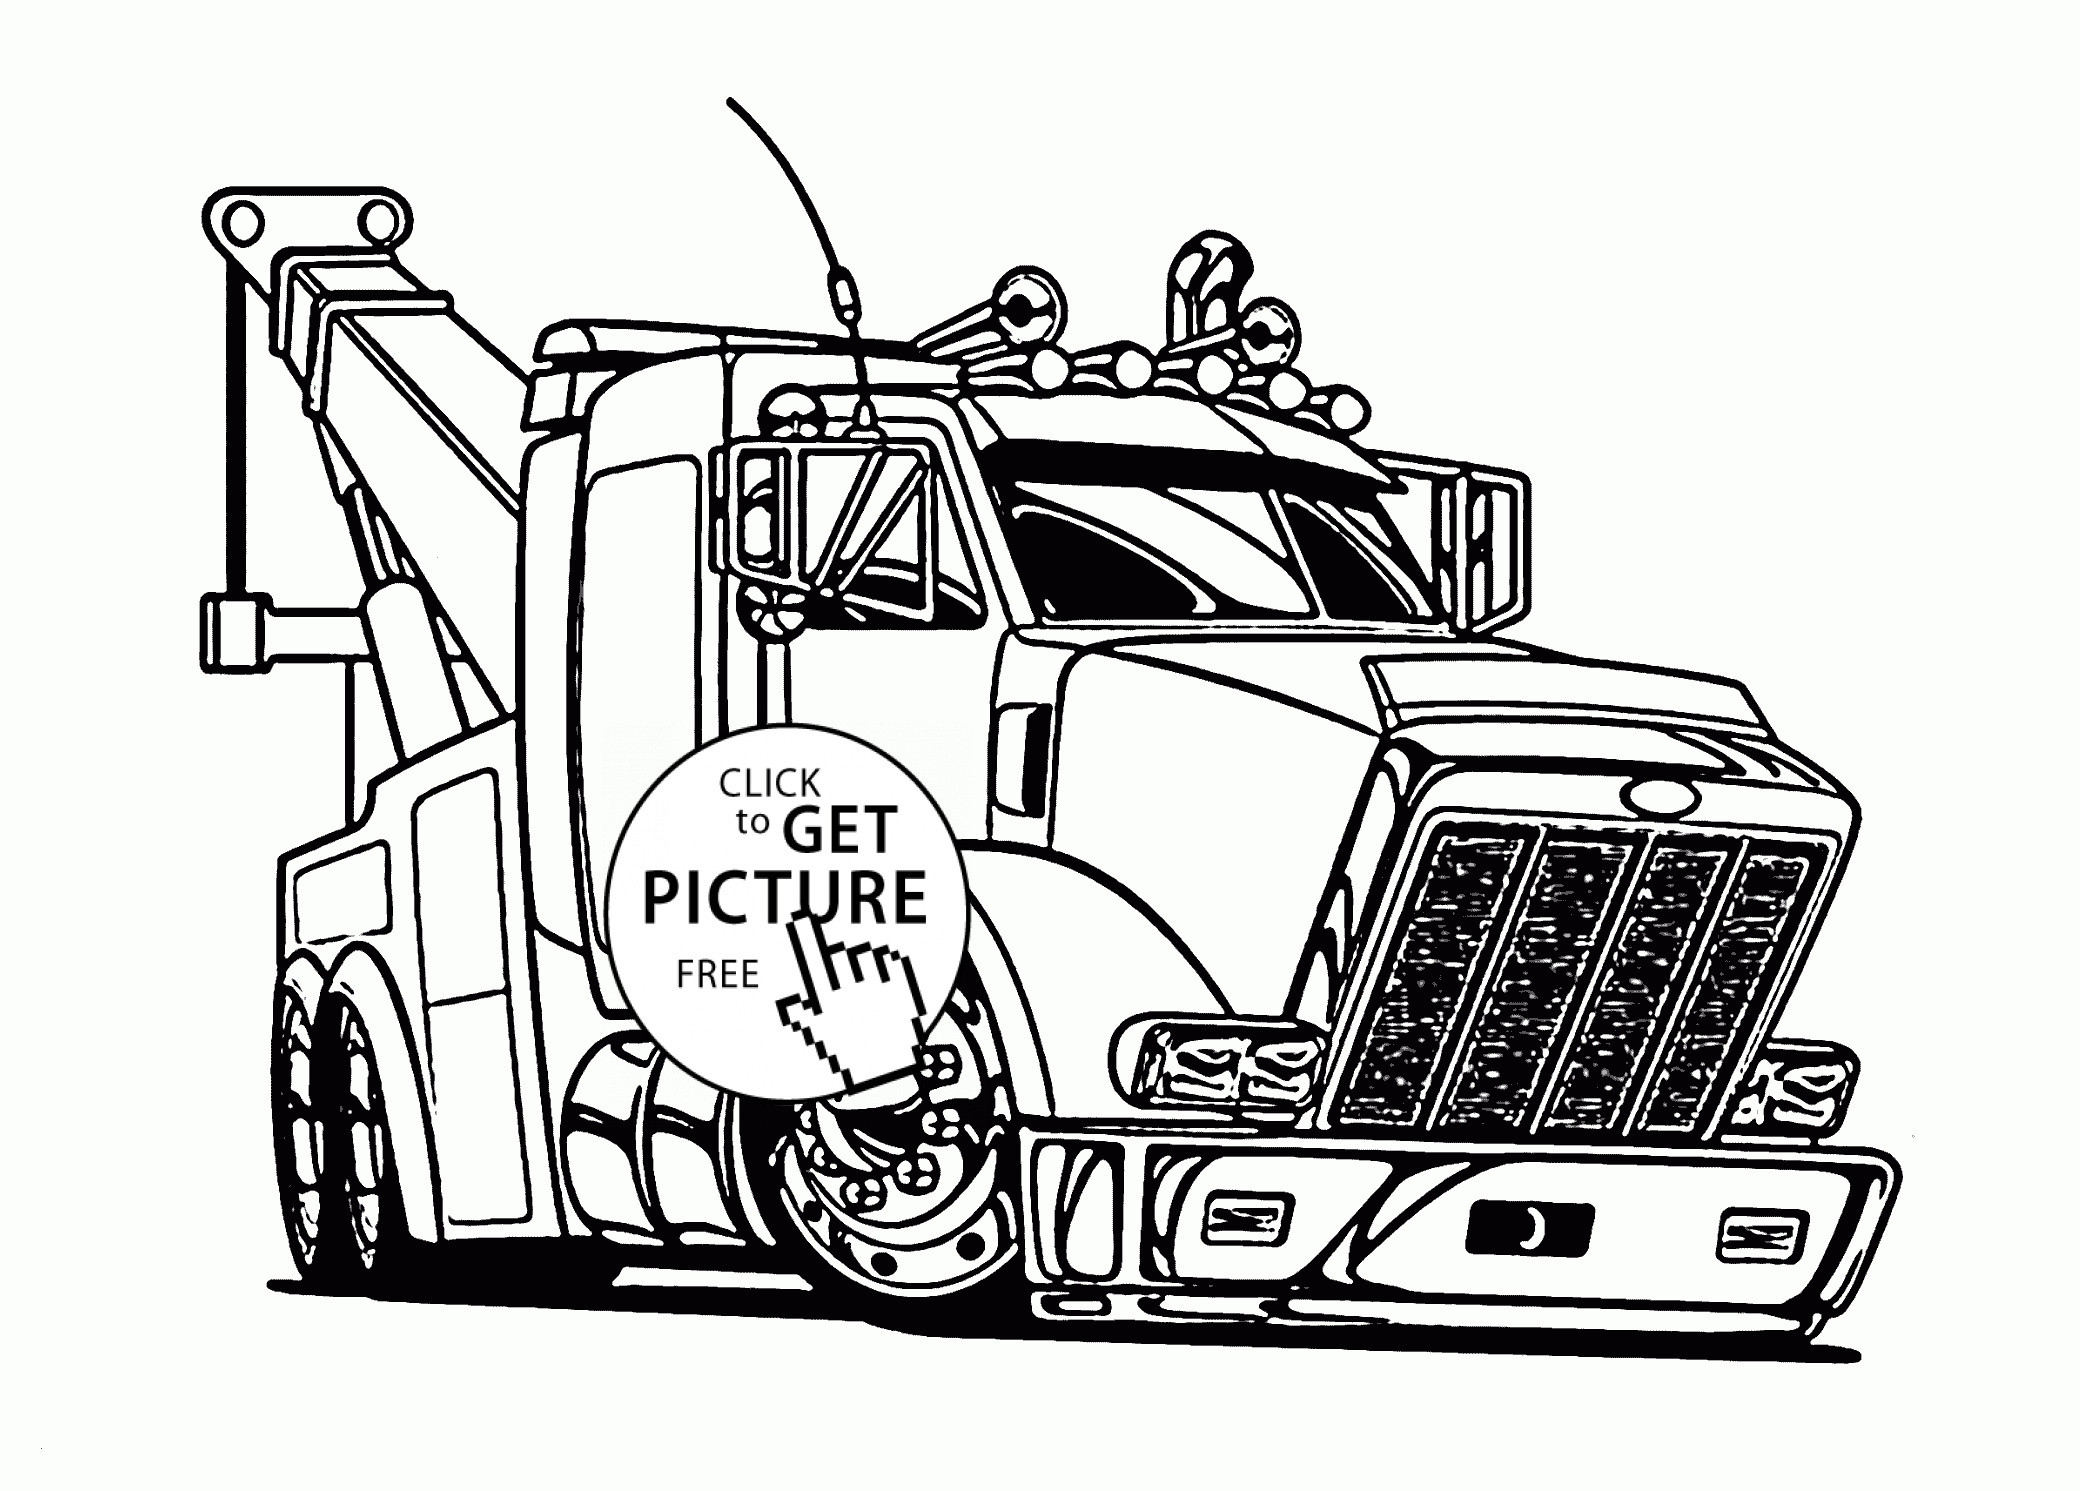 Big Truck Coloring Pages Coloring Pages And Books Semi Truck Coloring Pages Free Semi Truck